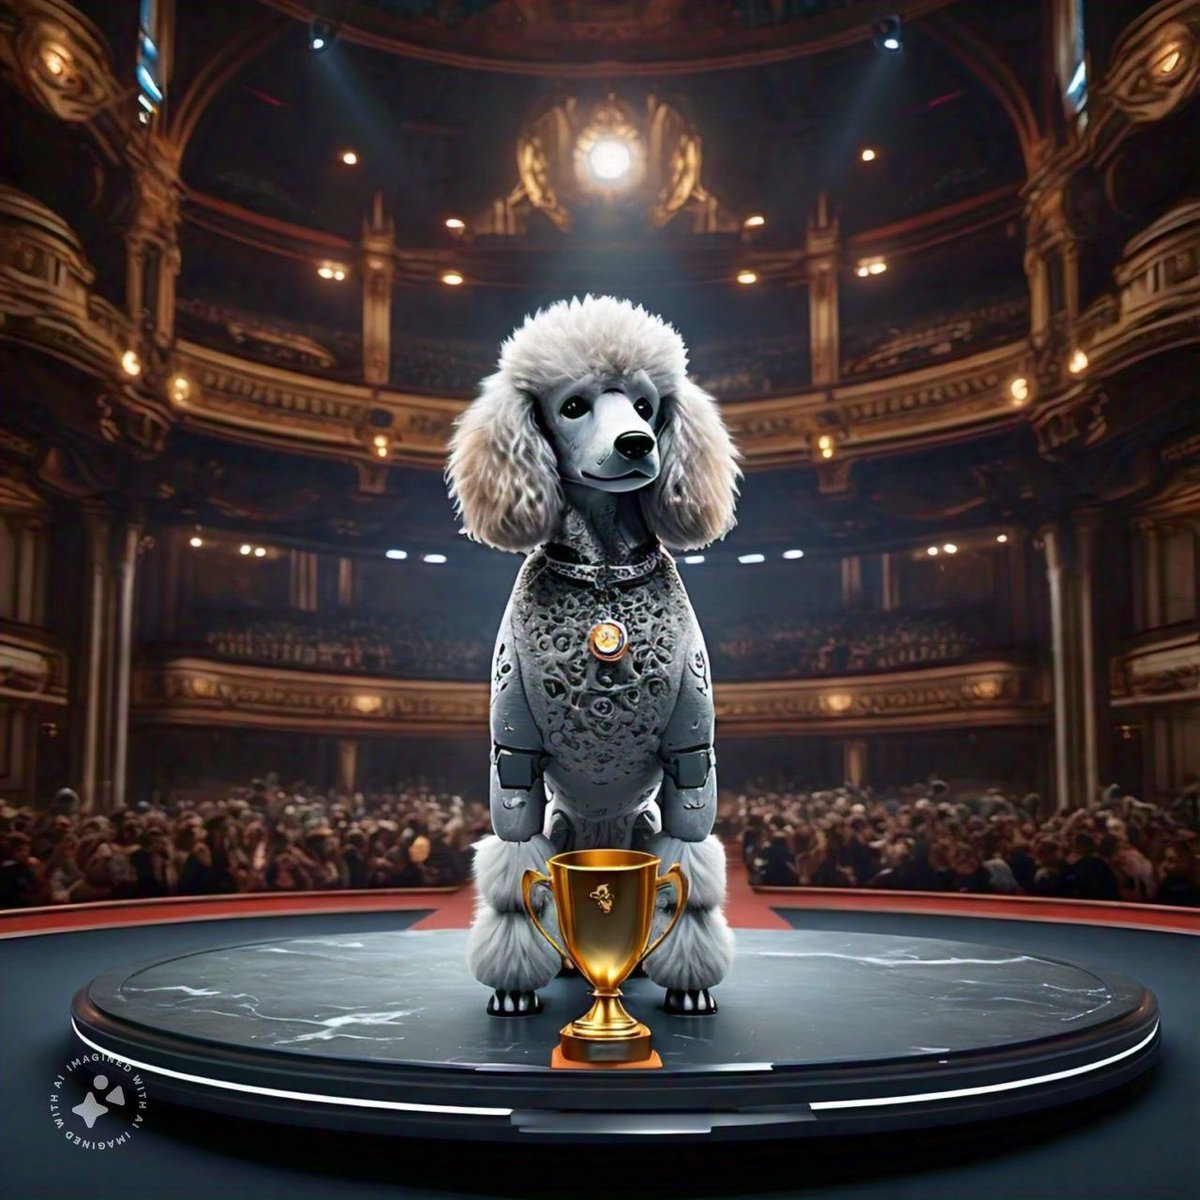 And the biggest #memecoin in 2024 is going to be $POODLE

This is the next crypto cult like $SHIB $DOGE or $PEPE
@PoodleDS 

#standardpoodle #poodle $poodle 
#Crypto #bonk #dog #memecoin #Memecoin2024 #myro #SOL #SolanaCommunity